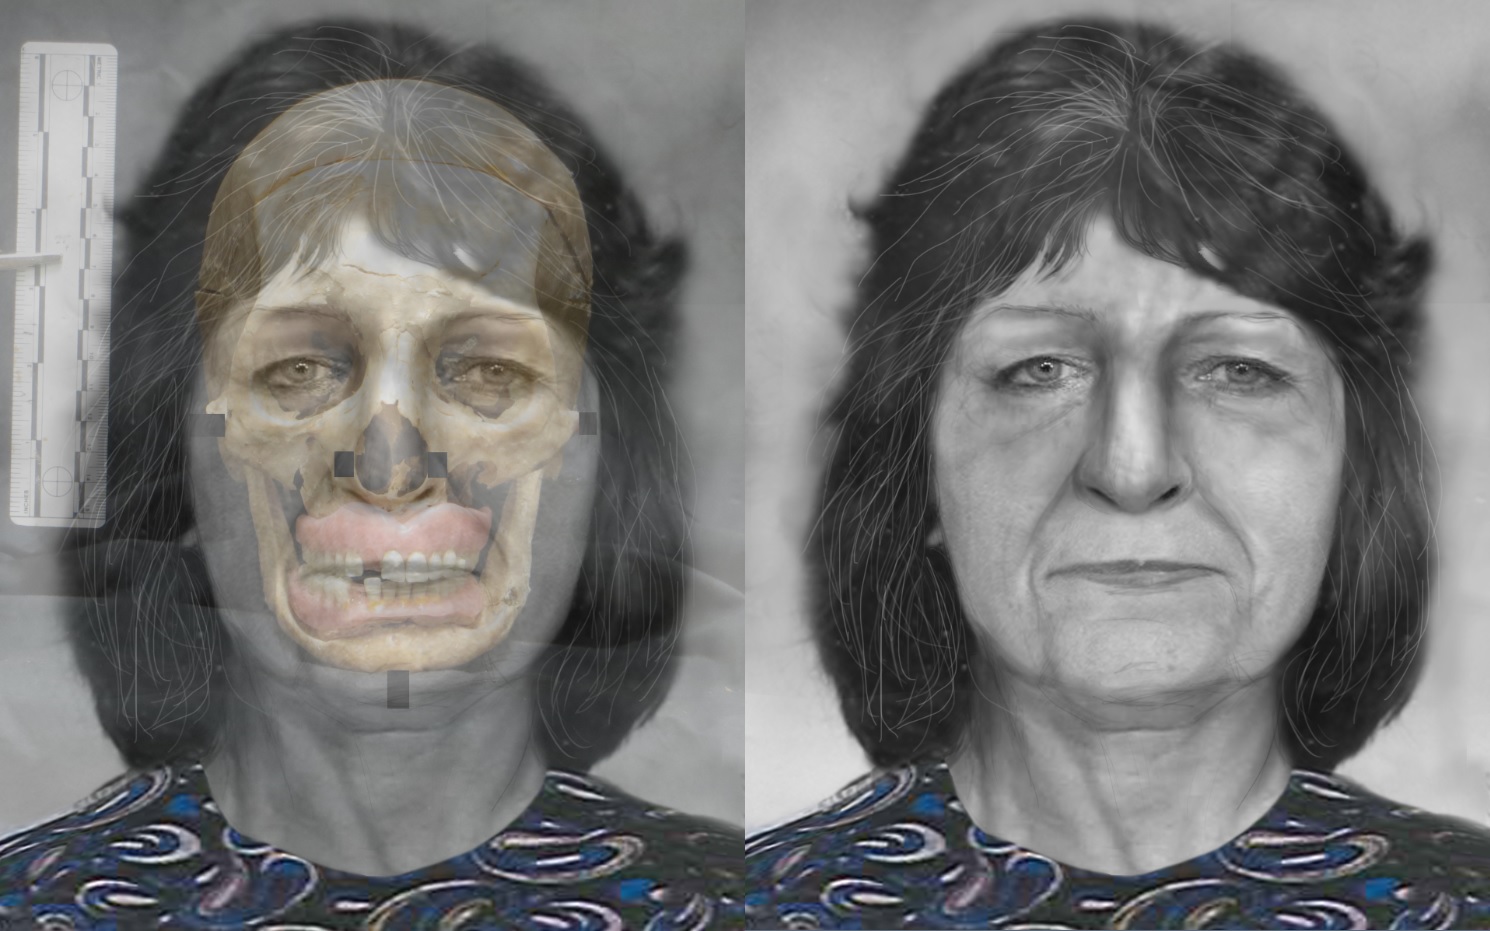 A woman's face is shown in a facial reconstruction from a skull.